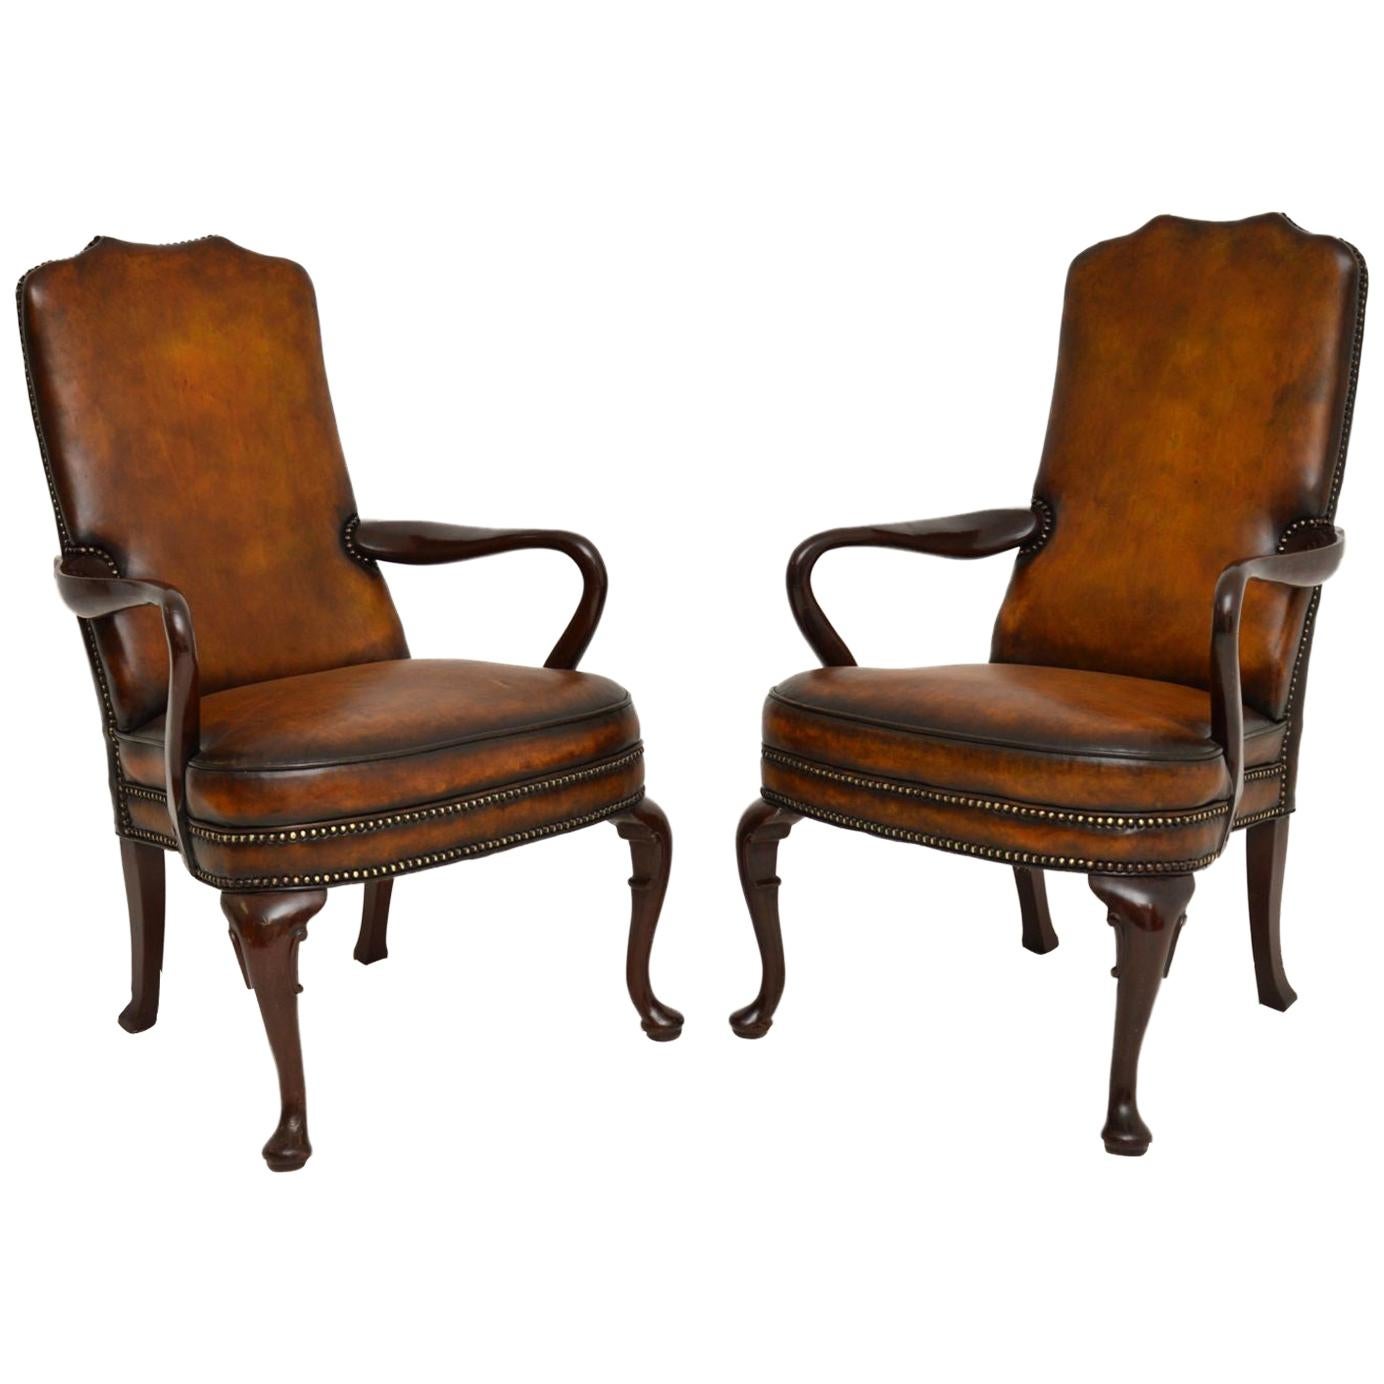 Pair of Antique Georgian Style Leather & Mahogany Armchairs